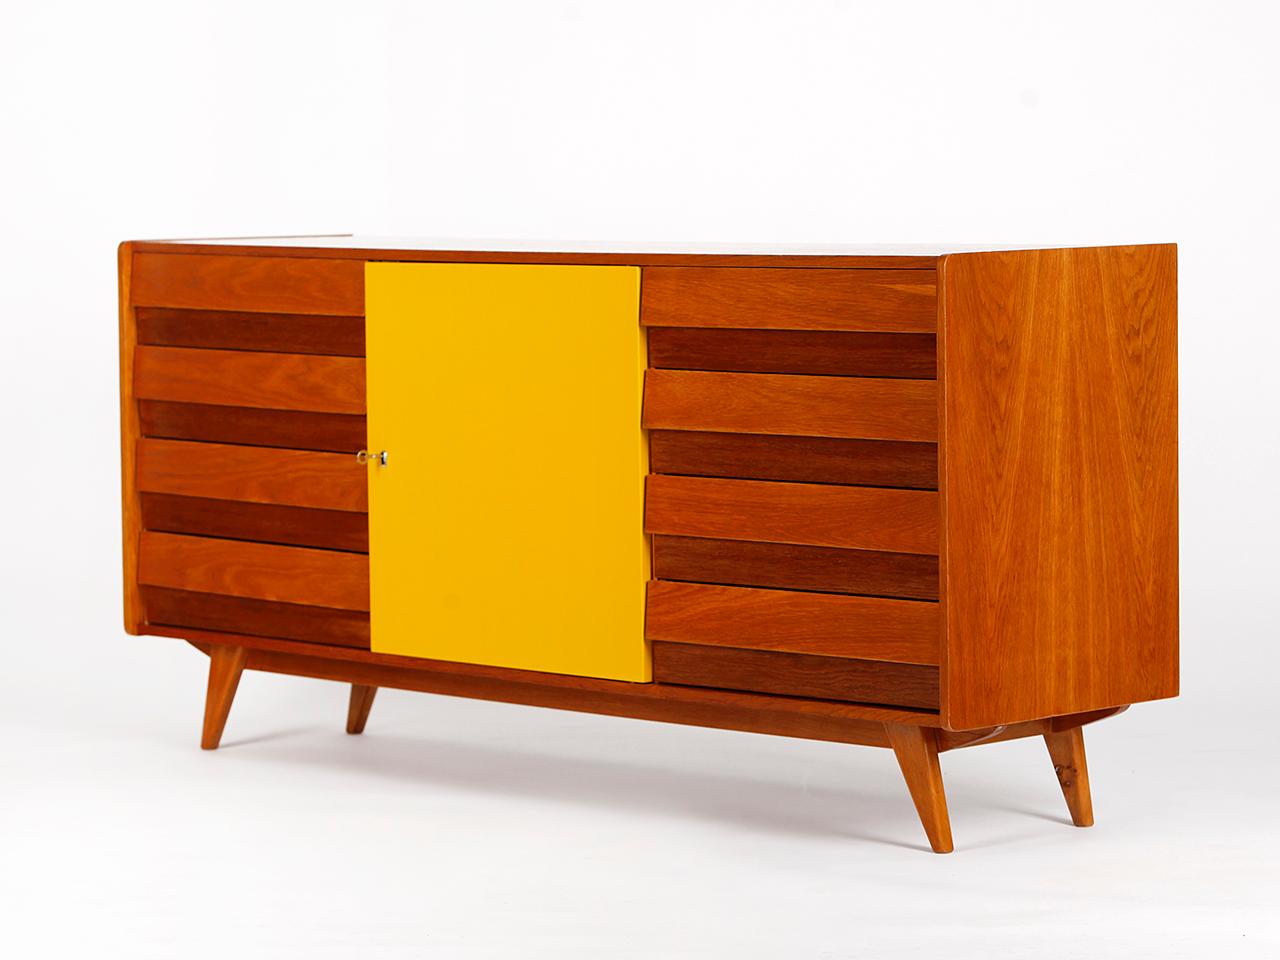 This model U-460 sideboard was designed by Jiri Jiroutek for Interior Praha in former Czechoslovakia. Produced in the 1960s. Completely restored and repainted. Excellent condition. Delivery time 3-4 weeks.